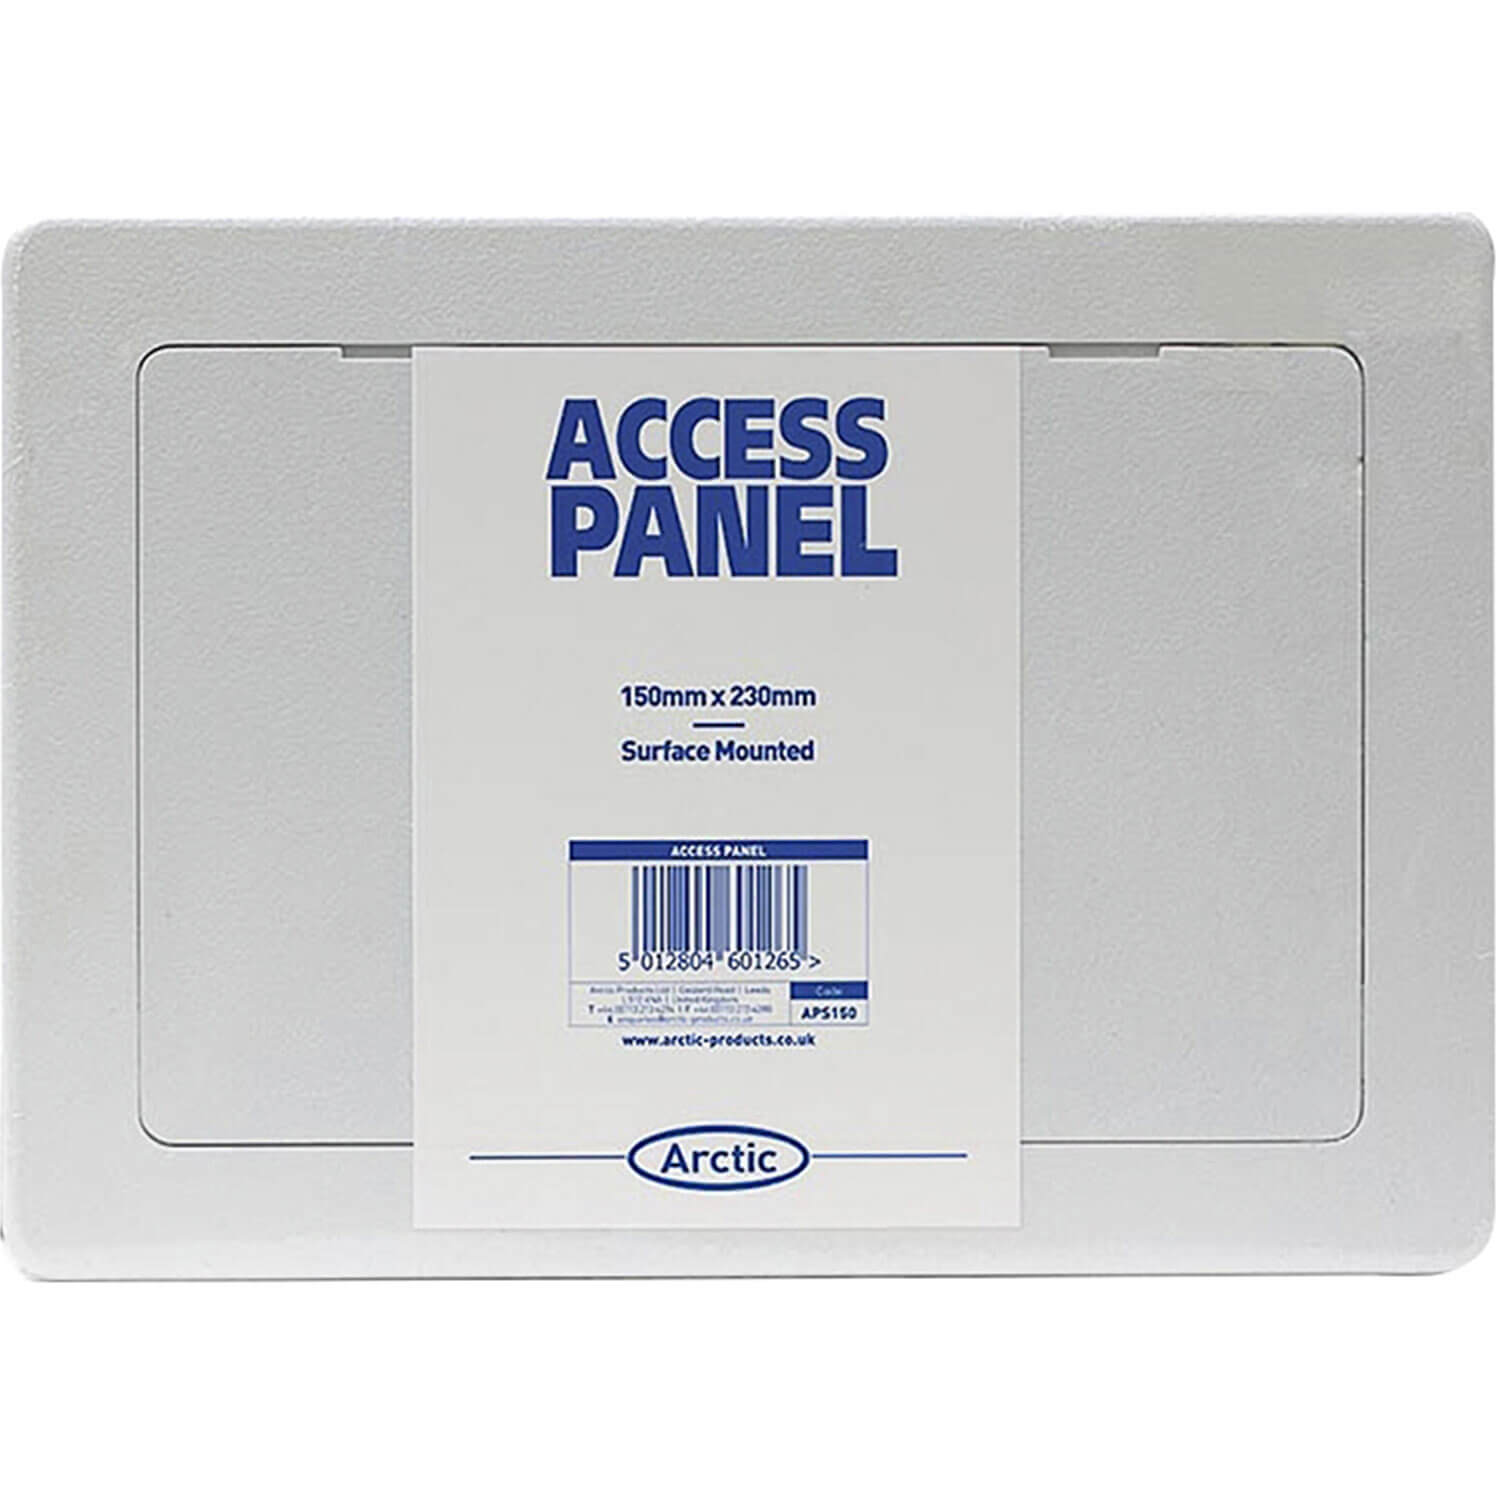 Photos - Other Hand Tools ARCTIC Hayes Access Panel 150mm 230mm APS150 